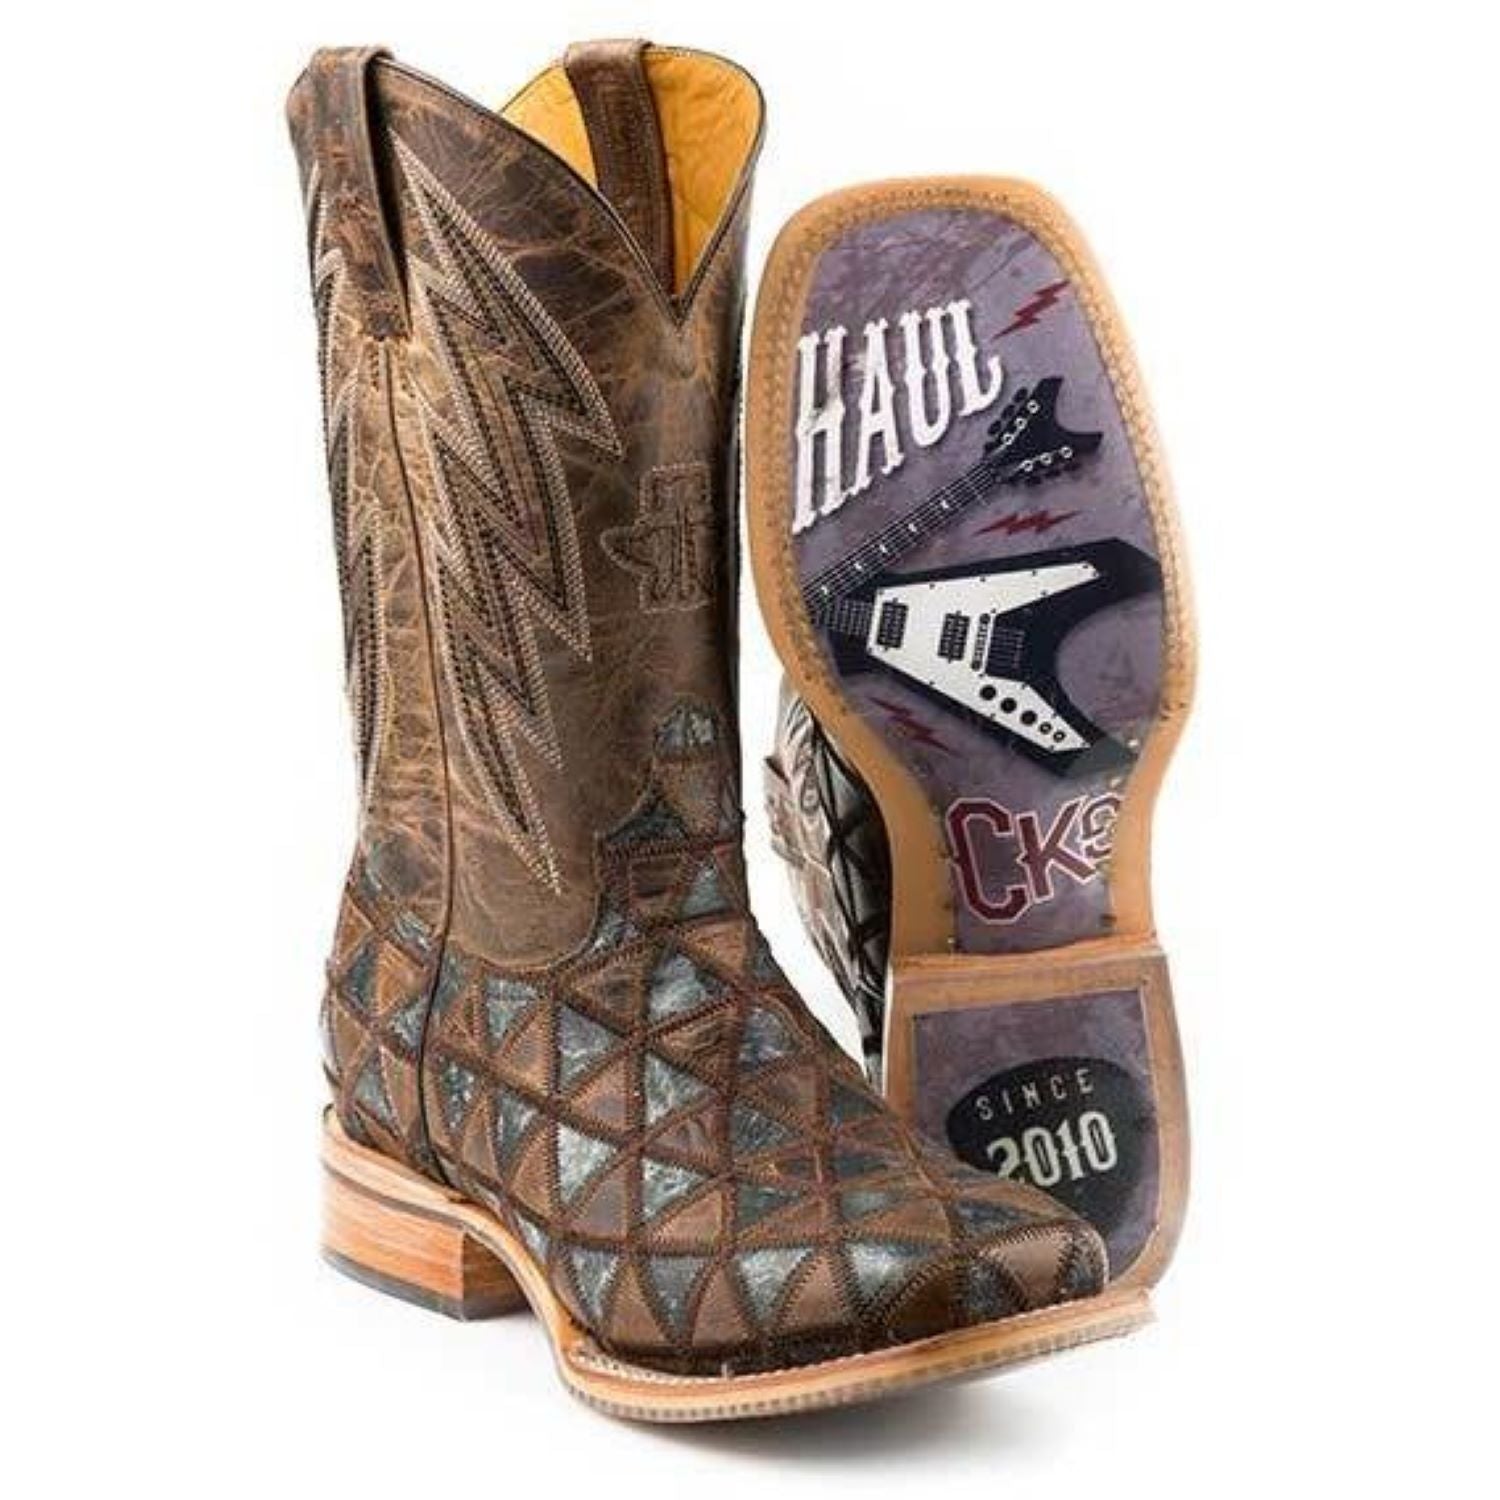 Men’s Tin Haul Rocker Boots With Guitar Sole Handcrafted Brown - yeehawcowboy